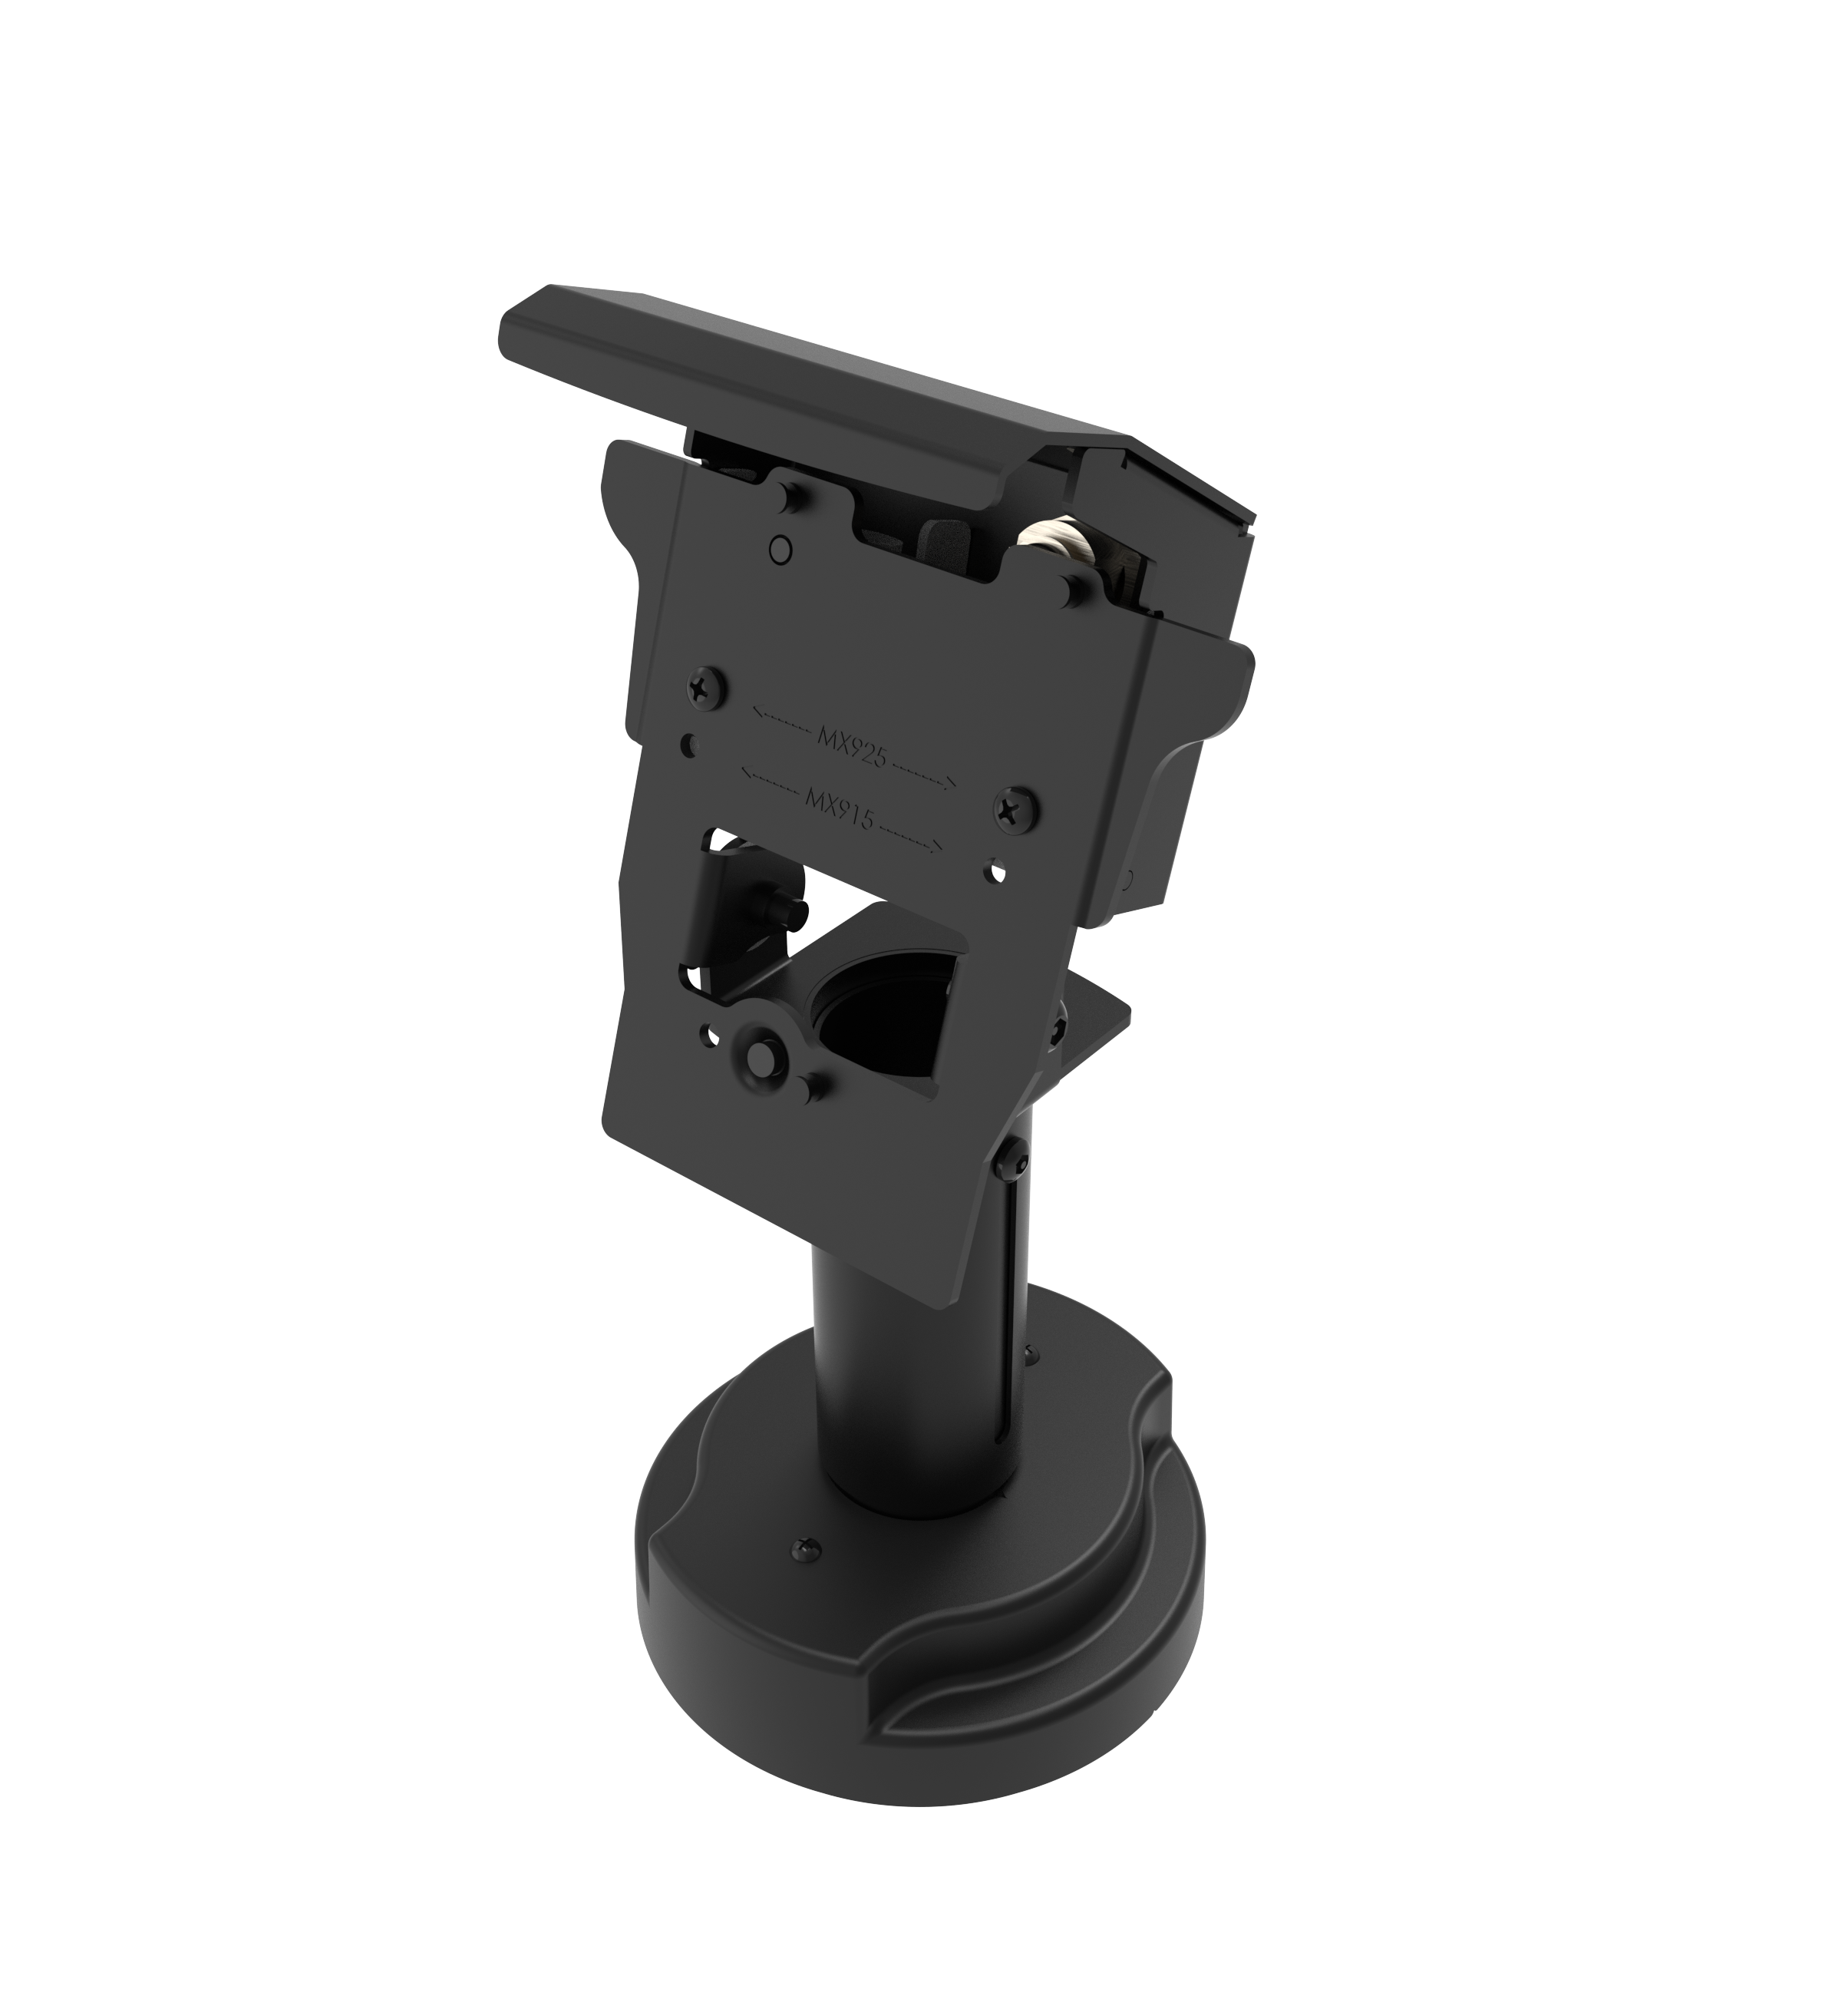 Telescoping Locking Stand for Verifone MX925 Payment Terminals